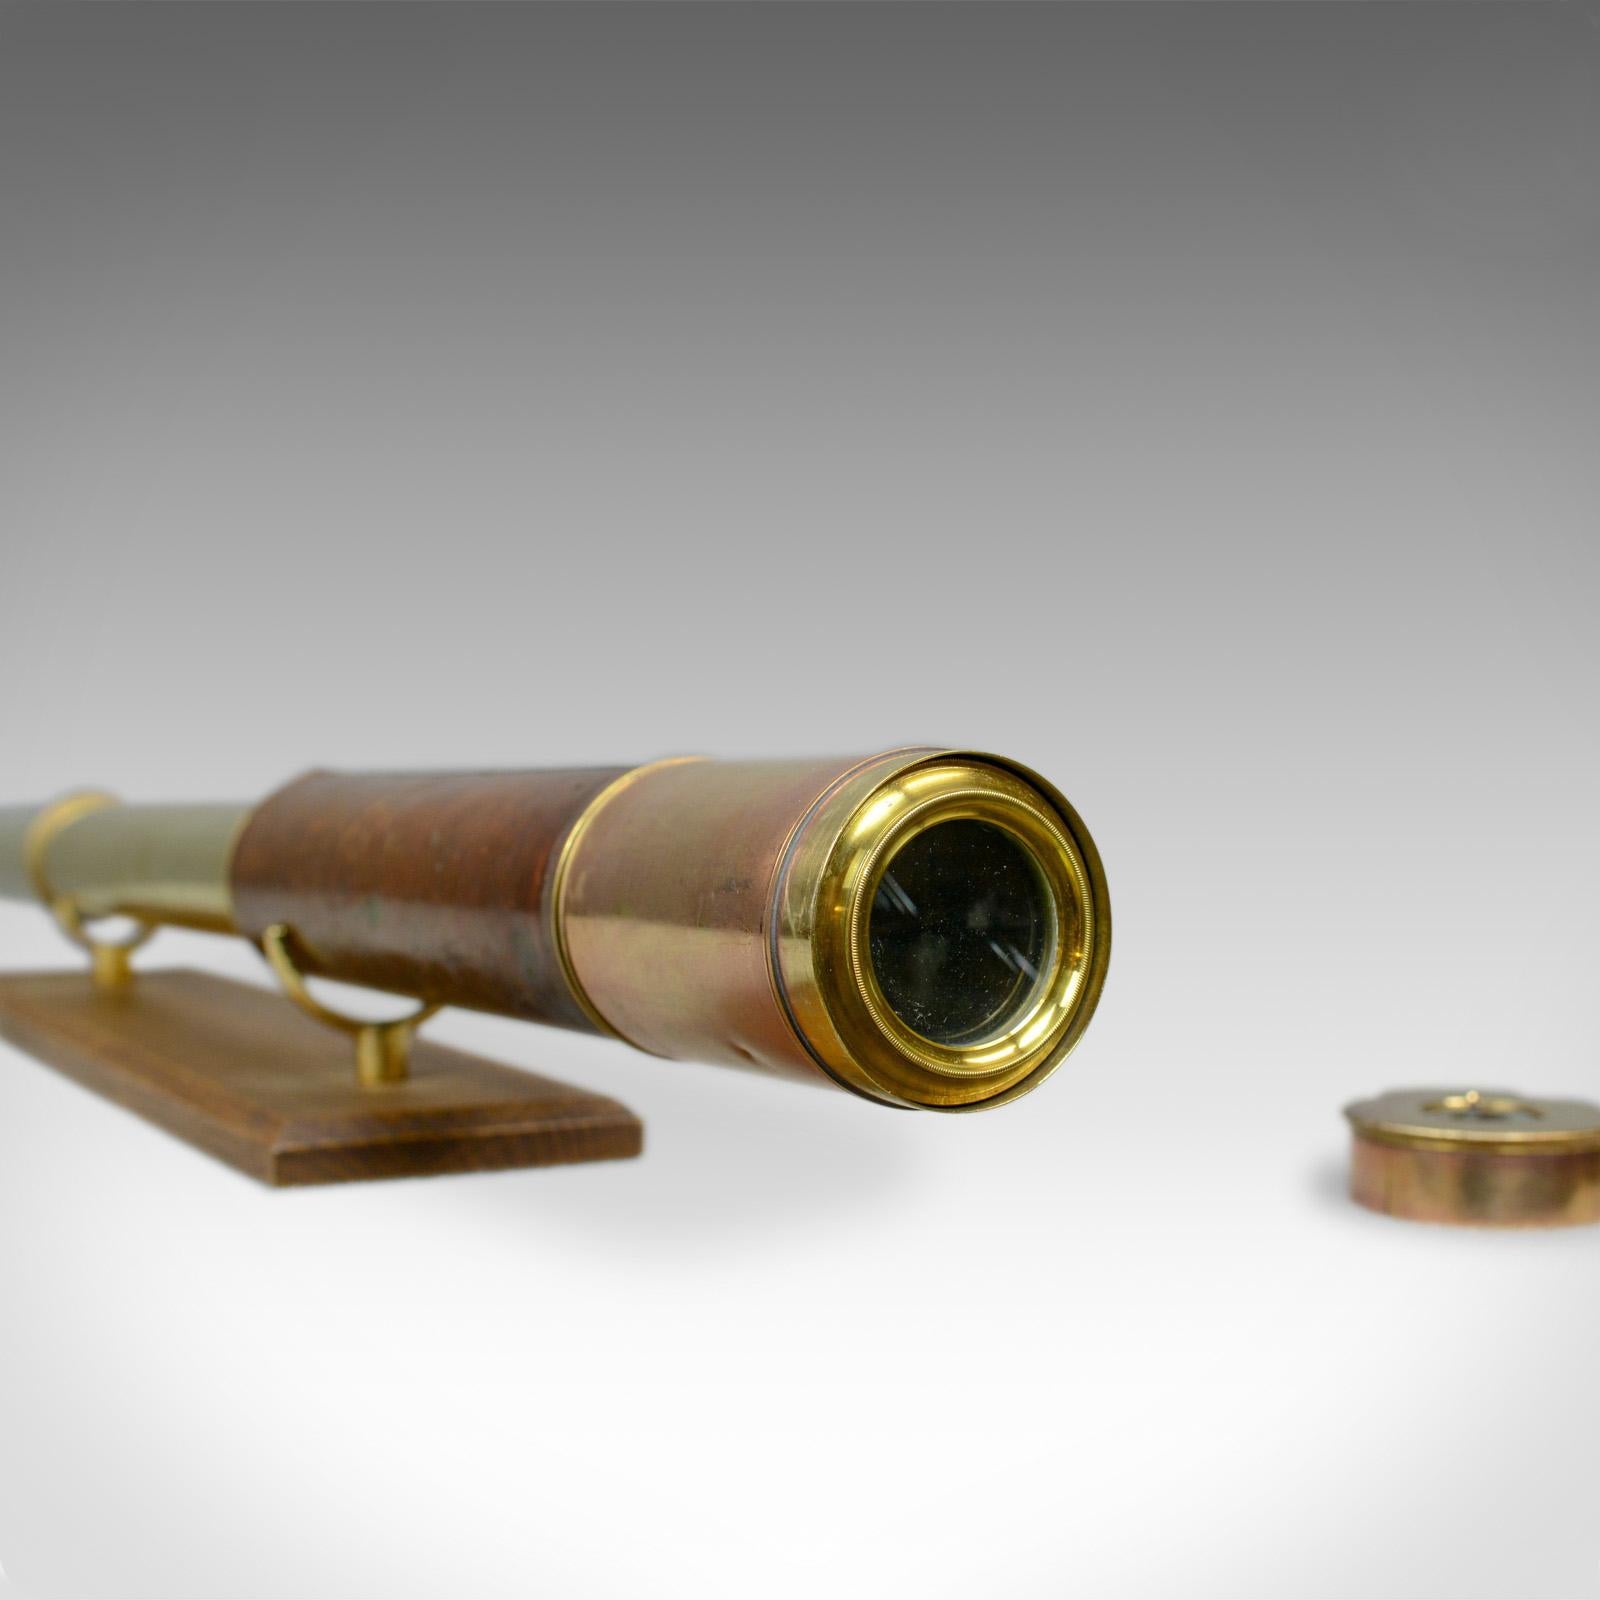 English Antique Telescope, Two Draw, Refractor, Stampa and Son, London, circa 1810